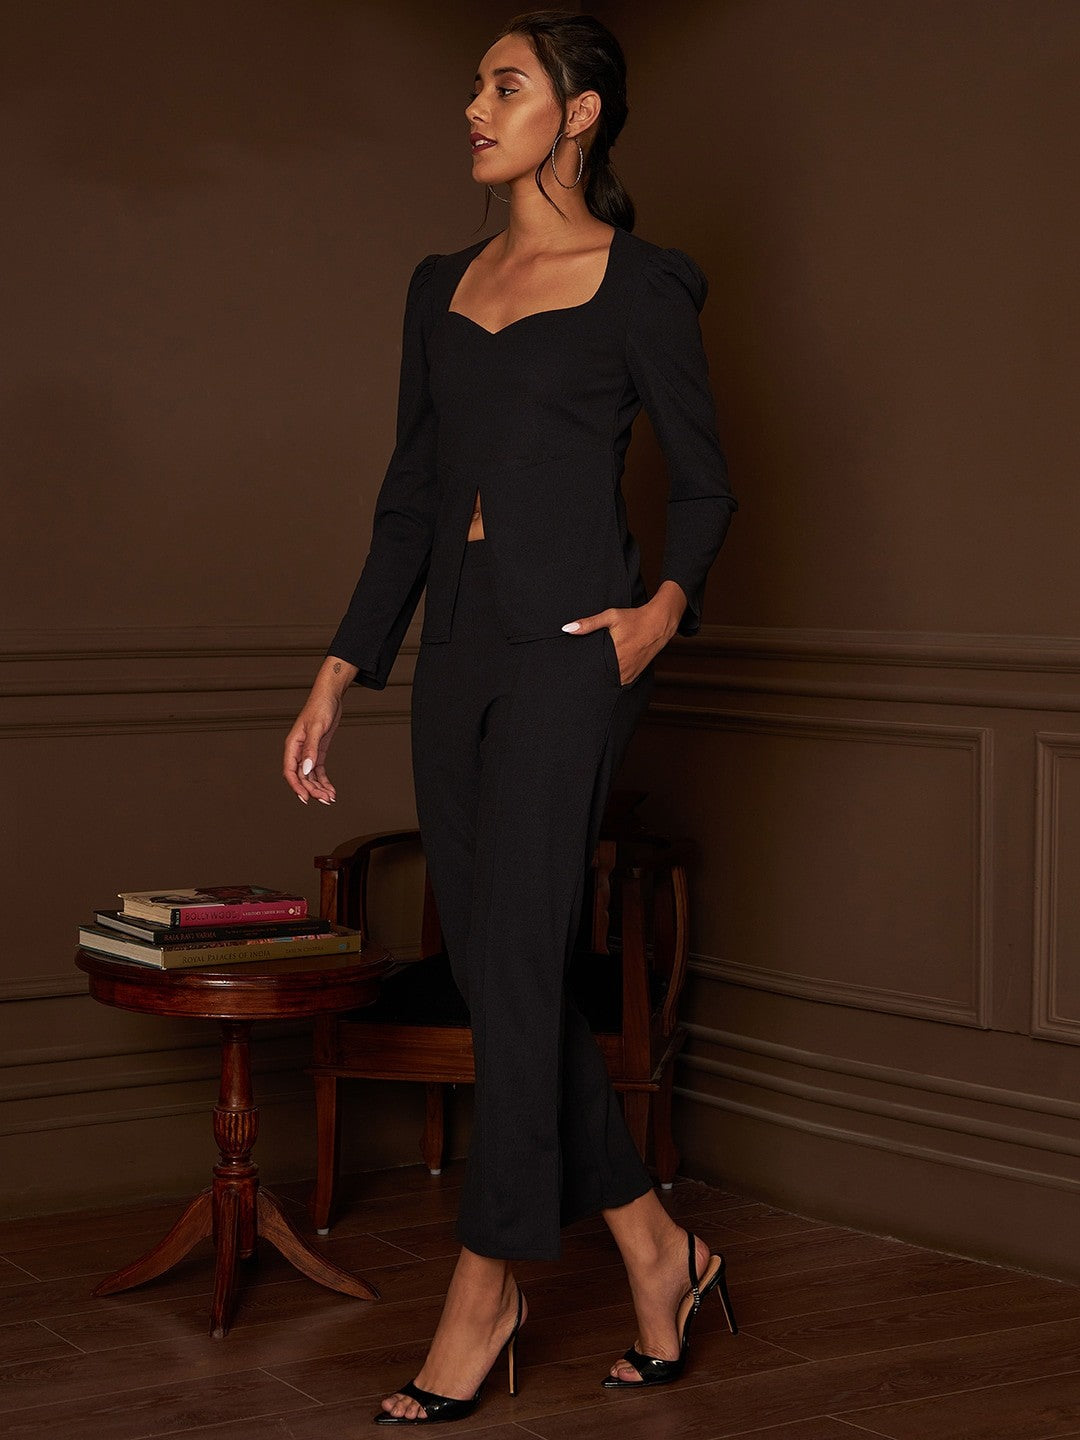 The model in the image is wearing BoldPower Black Co ord from Alice Milan. Crafted with the finest materials and impeccable attention to detail, the Formal Suit looks premium, trendy, luxurious and offers unparalleled comfort. It’s a perfect clothing option for loungewear, resort wear, party wear or for an airport look. The woman in the image looks happy, and confident with her style statement putting a happy smile on her face.